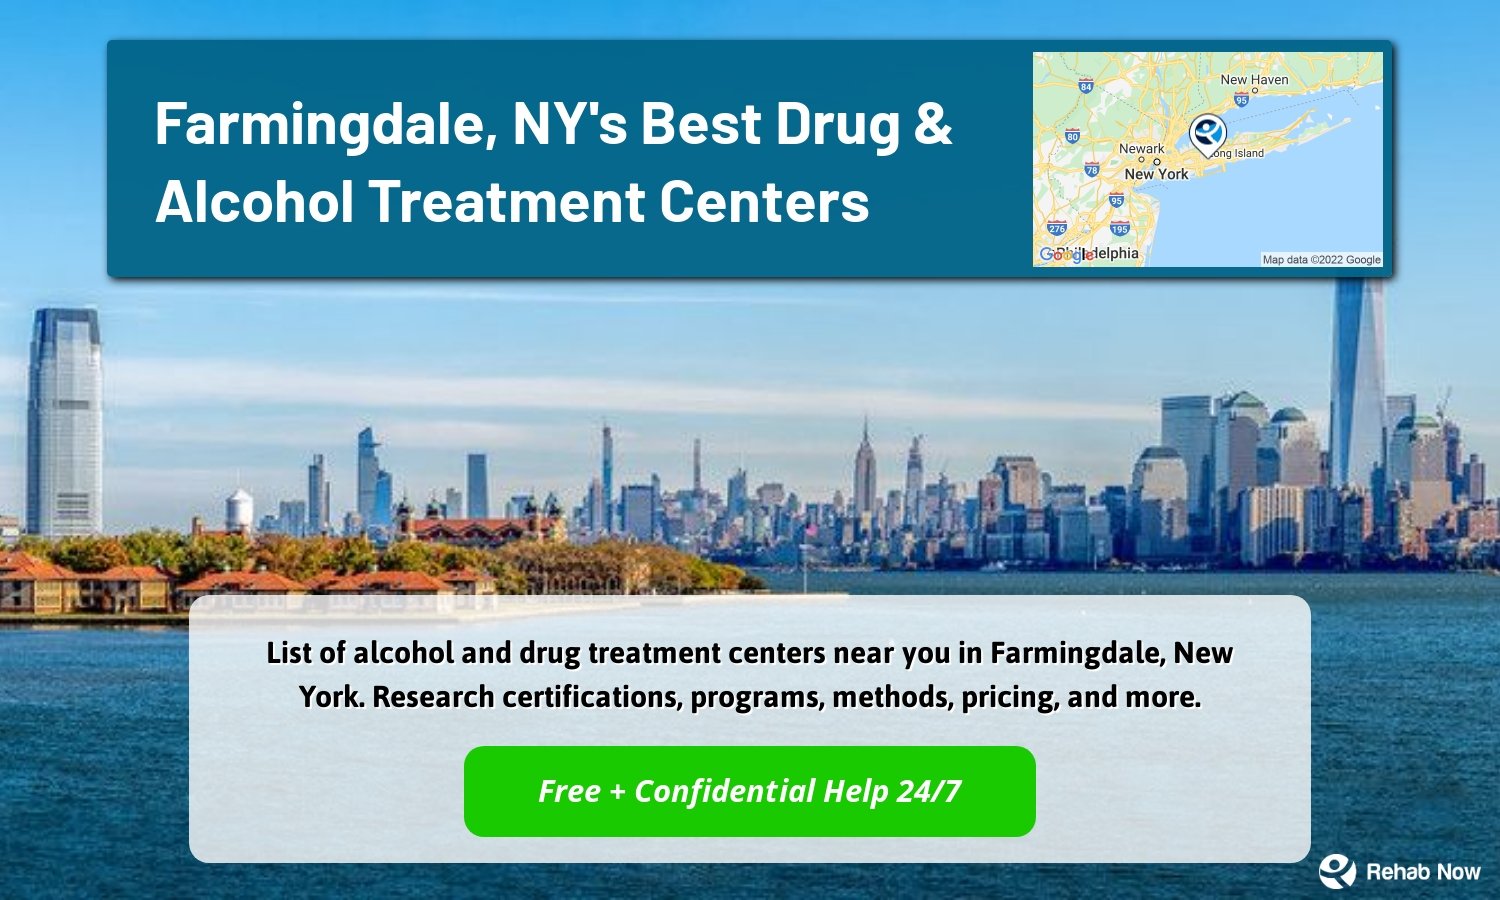 List of alcohol and drug treatment centers near you in Farmingdale, New York. Research certifications, programs, methods, pricing, and more.